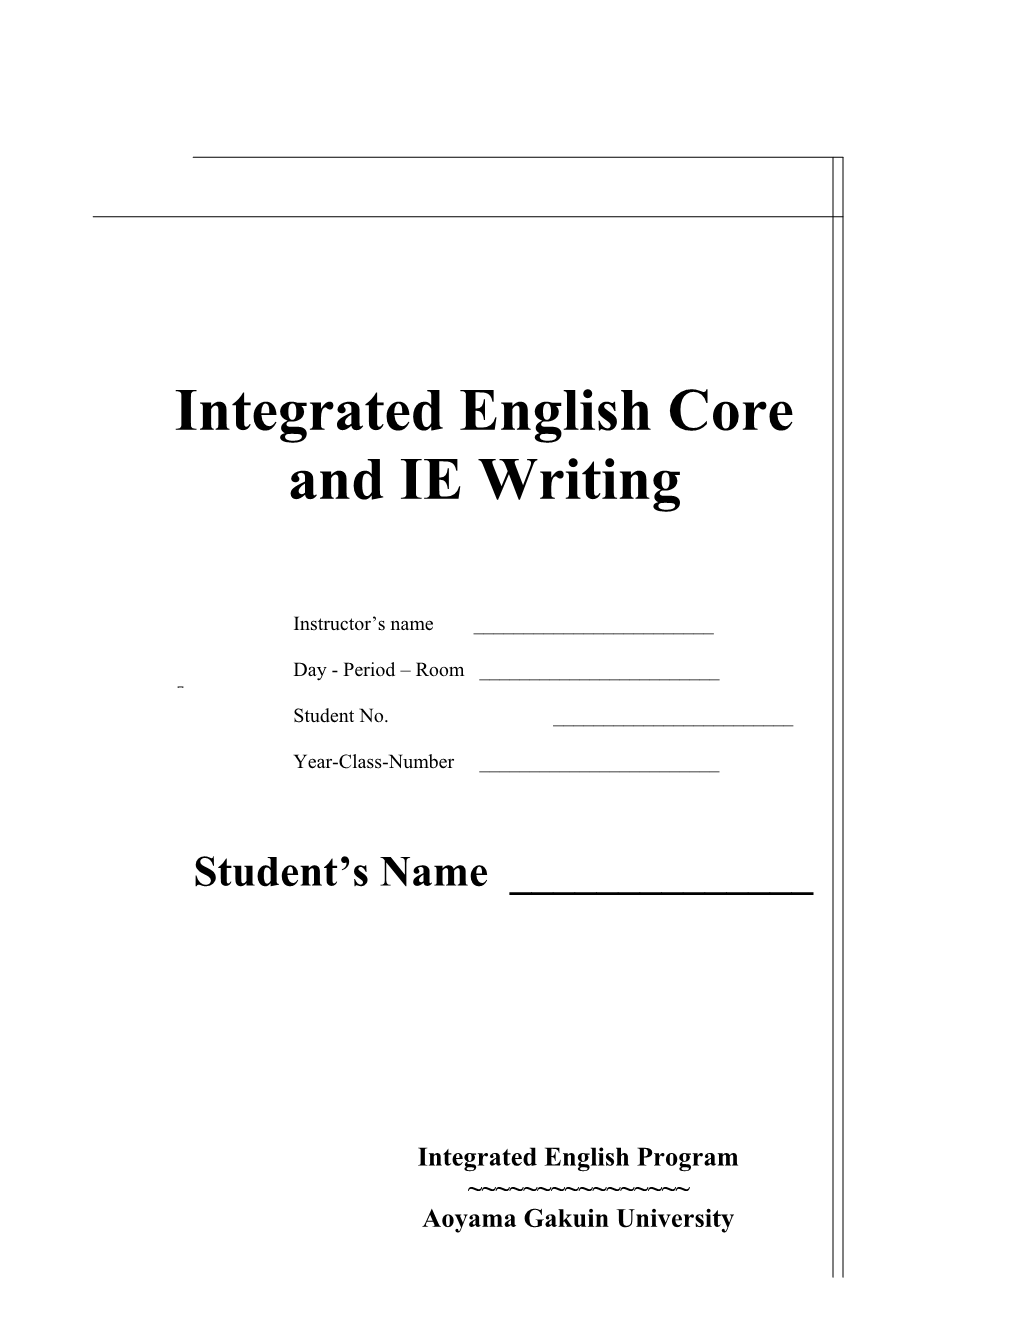 Integrated English Core